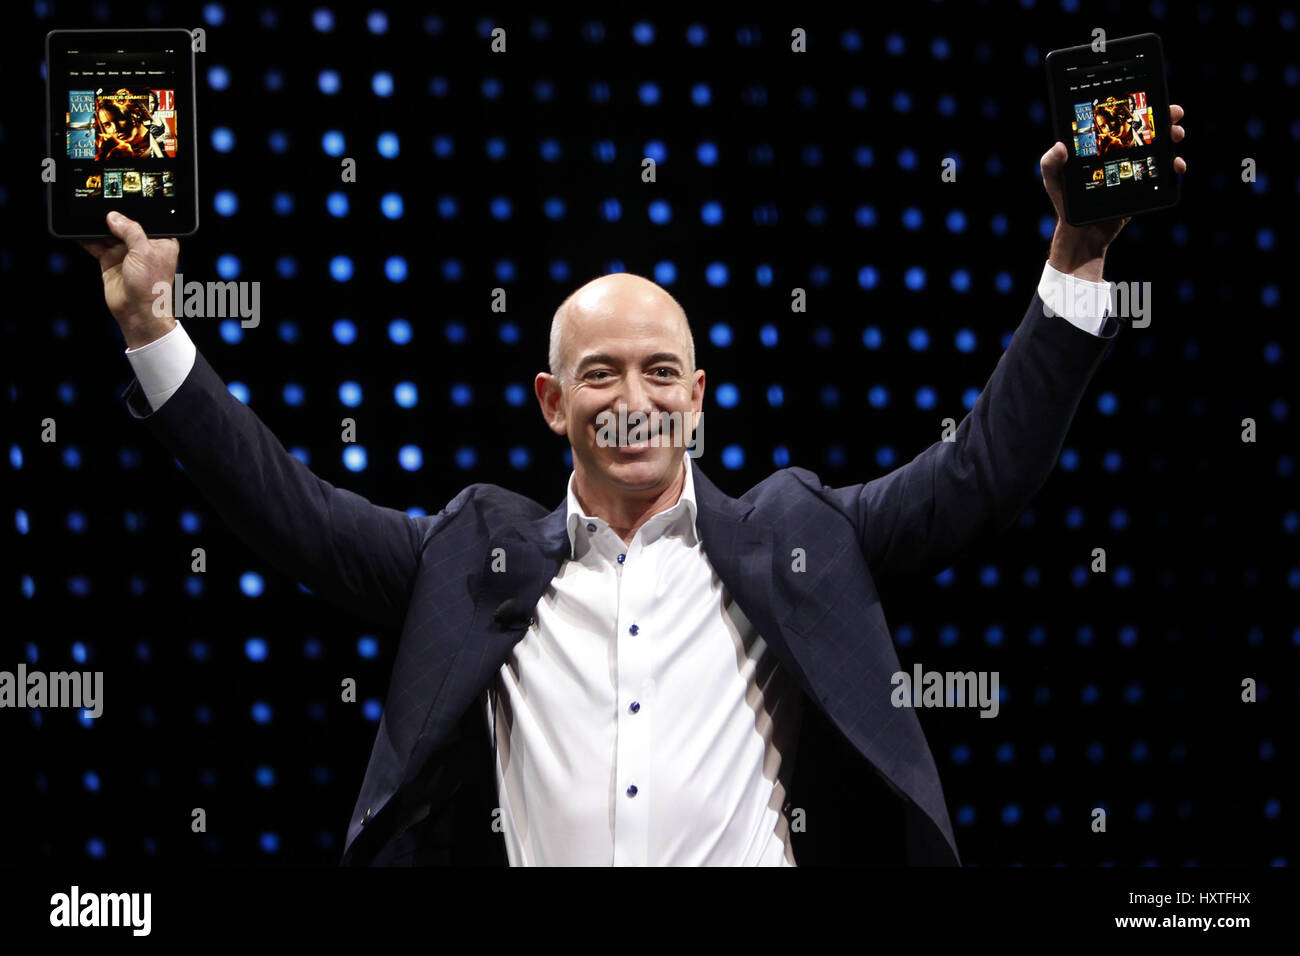 March 30, 2017 - FILE - JEFF BEZOS, Amazon (AMZN) founder and CEO, is now the second-richest person on the planet. Bezos' wealth climbed to $75.6 billion on Wednesday, according to the Bloomberg Billionaires Index. Helping Bezos get to the No. 2 perch: A rally in Amazon shares to a record. They closed up 2% at $874.32, lifting Amazon's market cap to $422 billion. Bezos owns nearly 17% of Amazon's shares, worth $70 billion, according to S&P Global Market Intelligence. Pictured: Sept. 6, 2012 - Santa Monica, California, U.S. - Jeff Bezos, chief executive officer of Amazon.com Inc., introduces ne Stock Photo